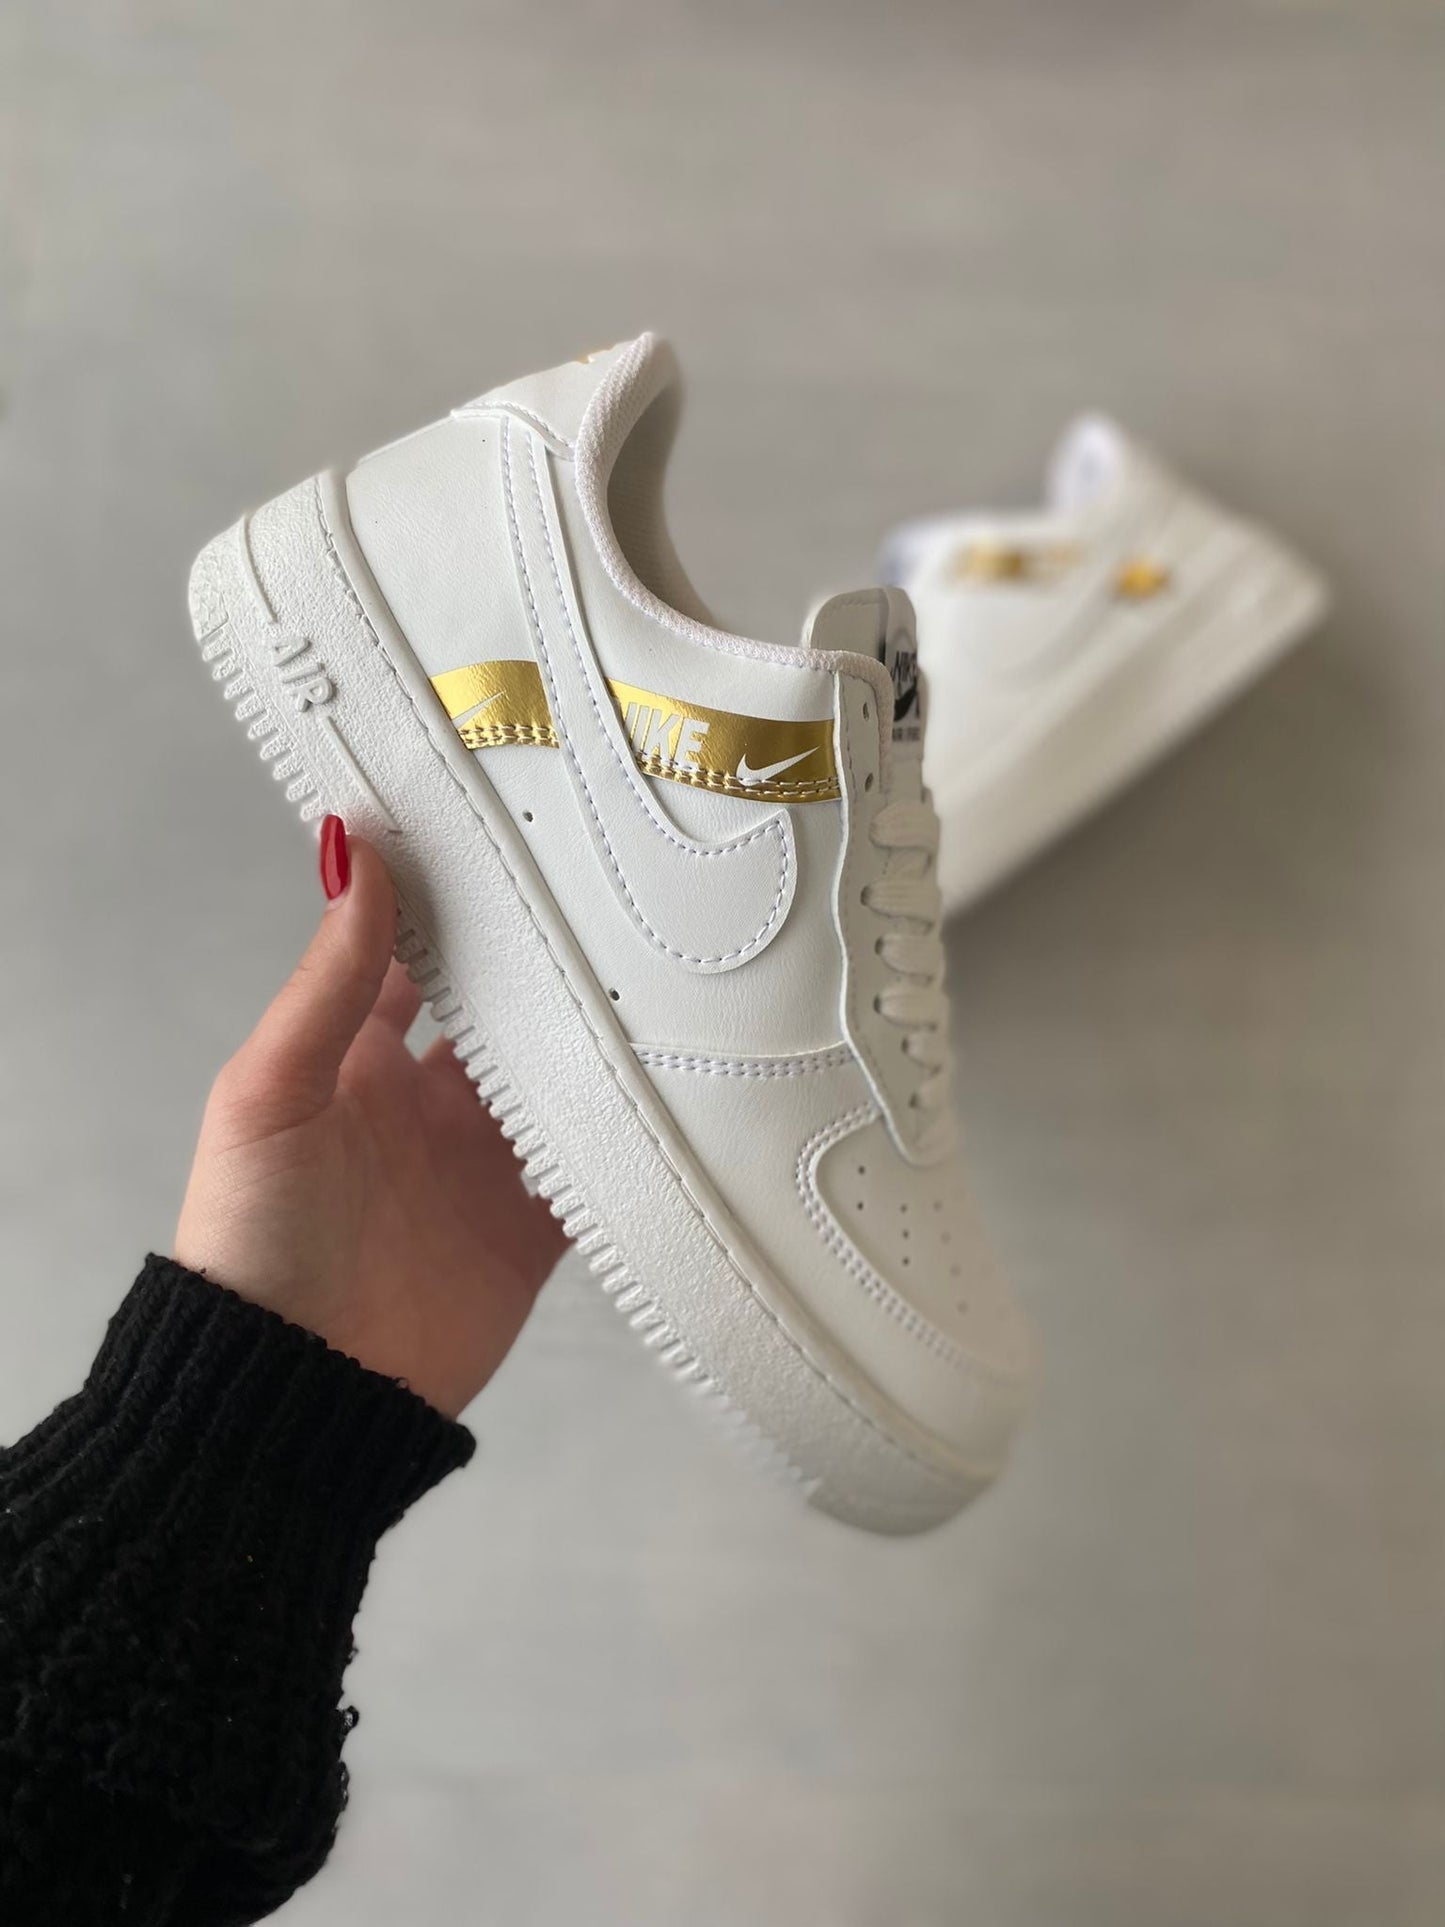 Nike Air Force Gold Exclusive "22